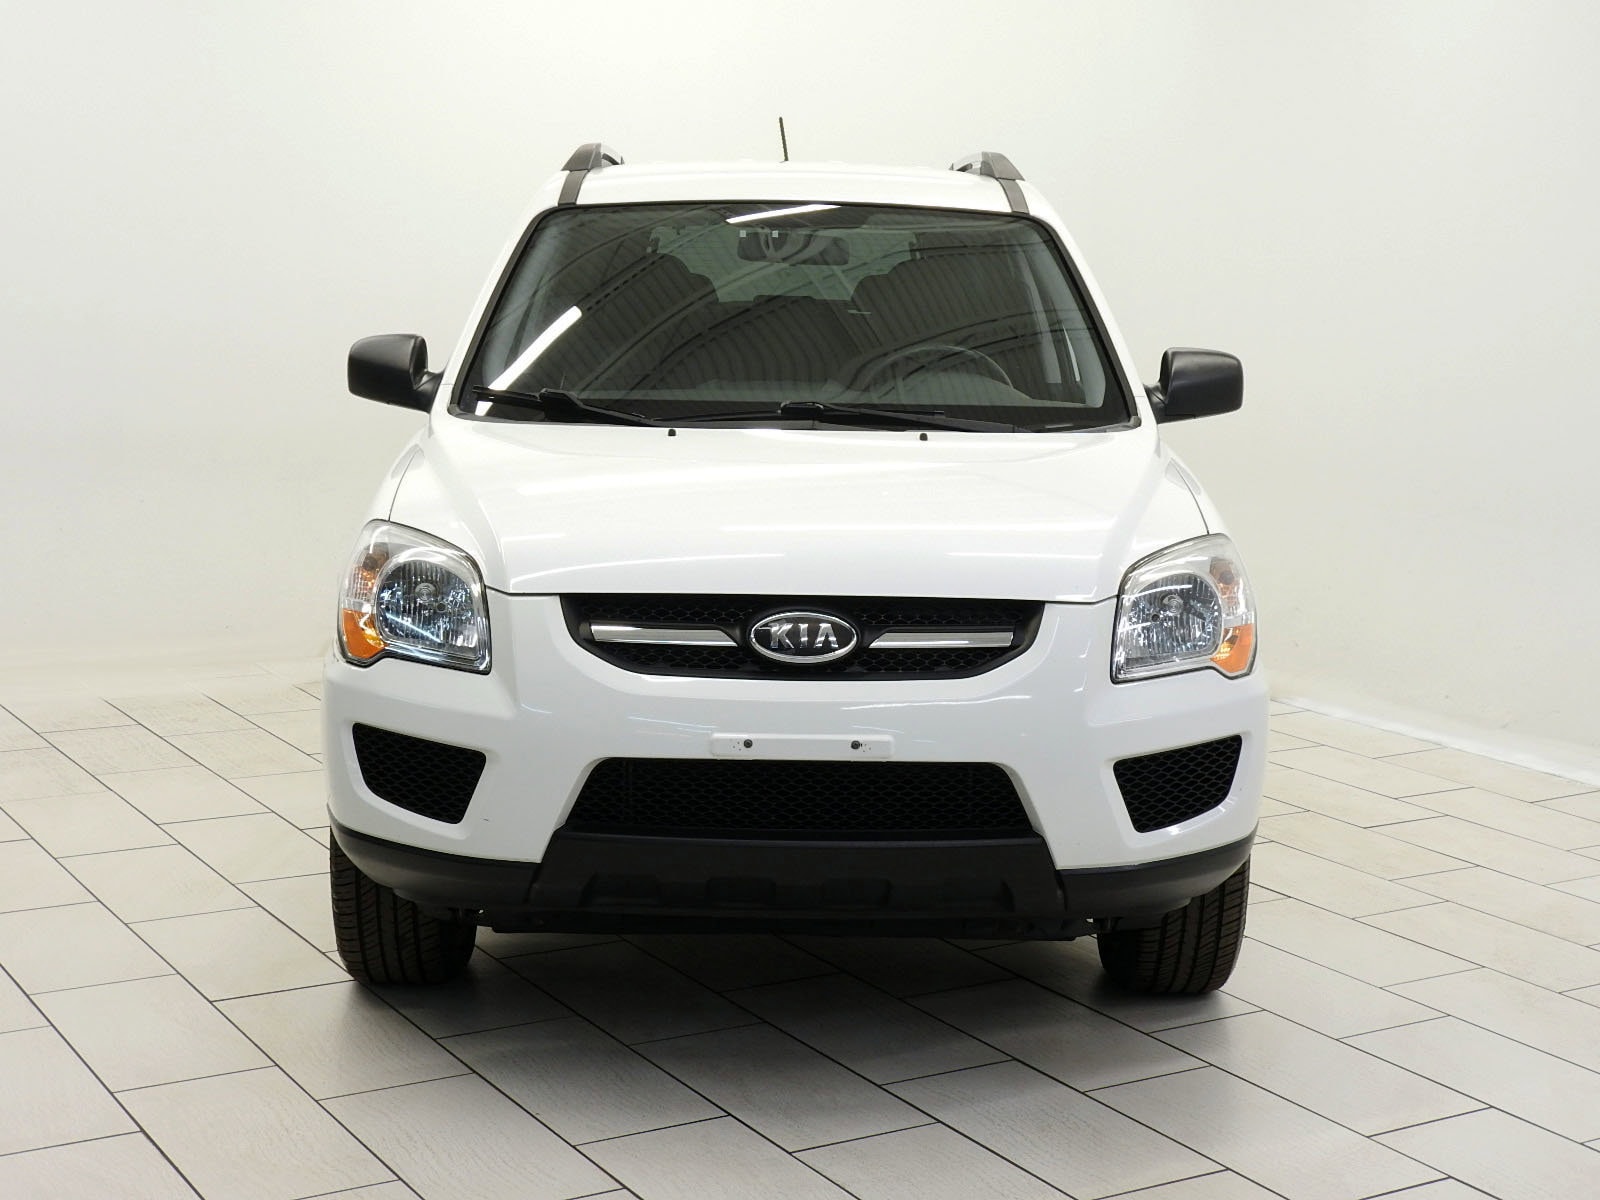 Used 2009 Kia Sportage LX with VIN KNDJF724997594037 for sale in Charlotte, NC